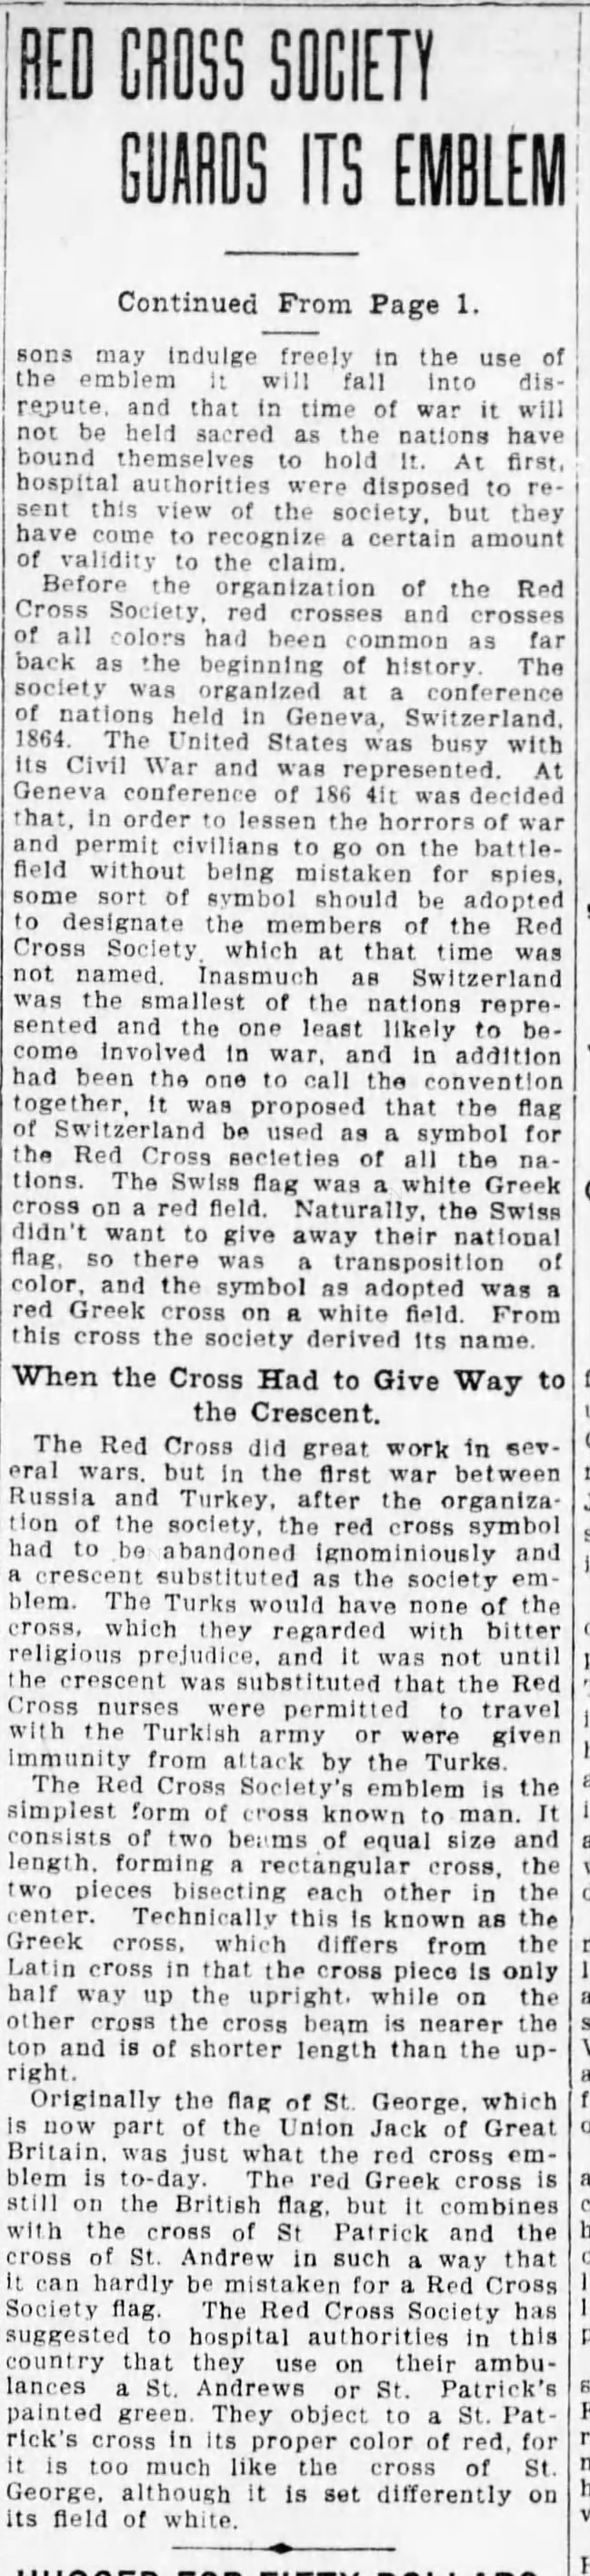 Heraldry Clipping: (Part 2) Red Cross Society Guards Its Emblem